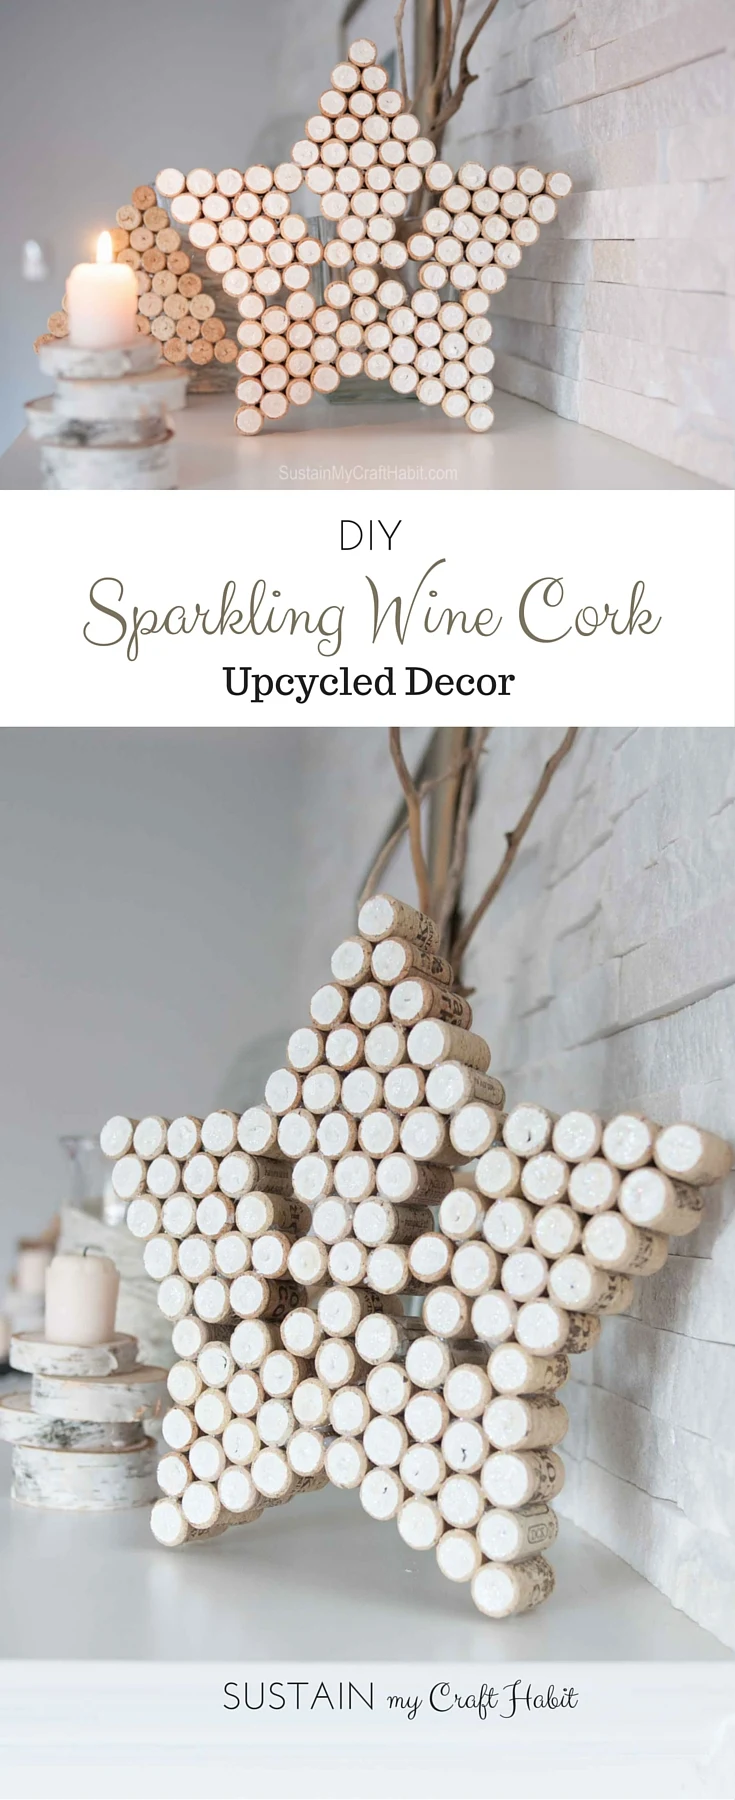 Wine cork crafts! How to make a sparkling star with wine corks. Add a little paint and glitter for a beautiful Christmas or year-round decor. Fun #winecorkcrafts idea! Elegant #crafts with wine corks.